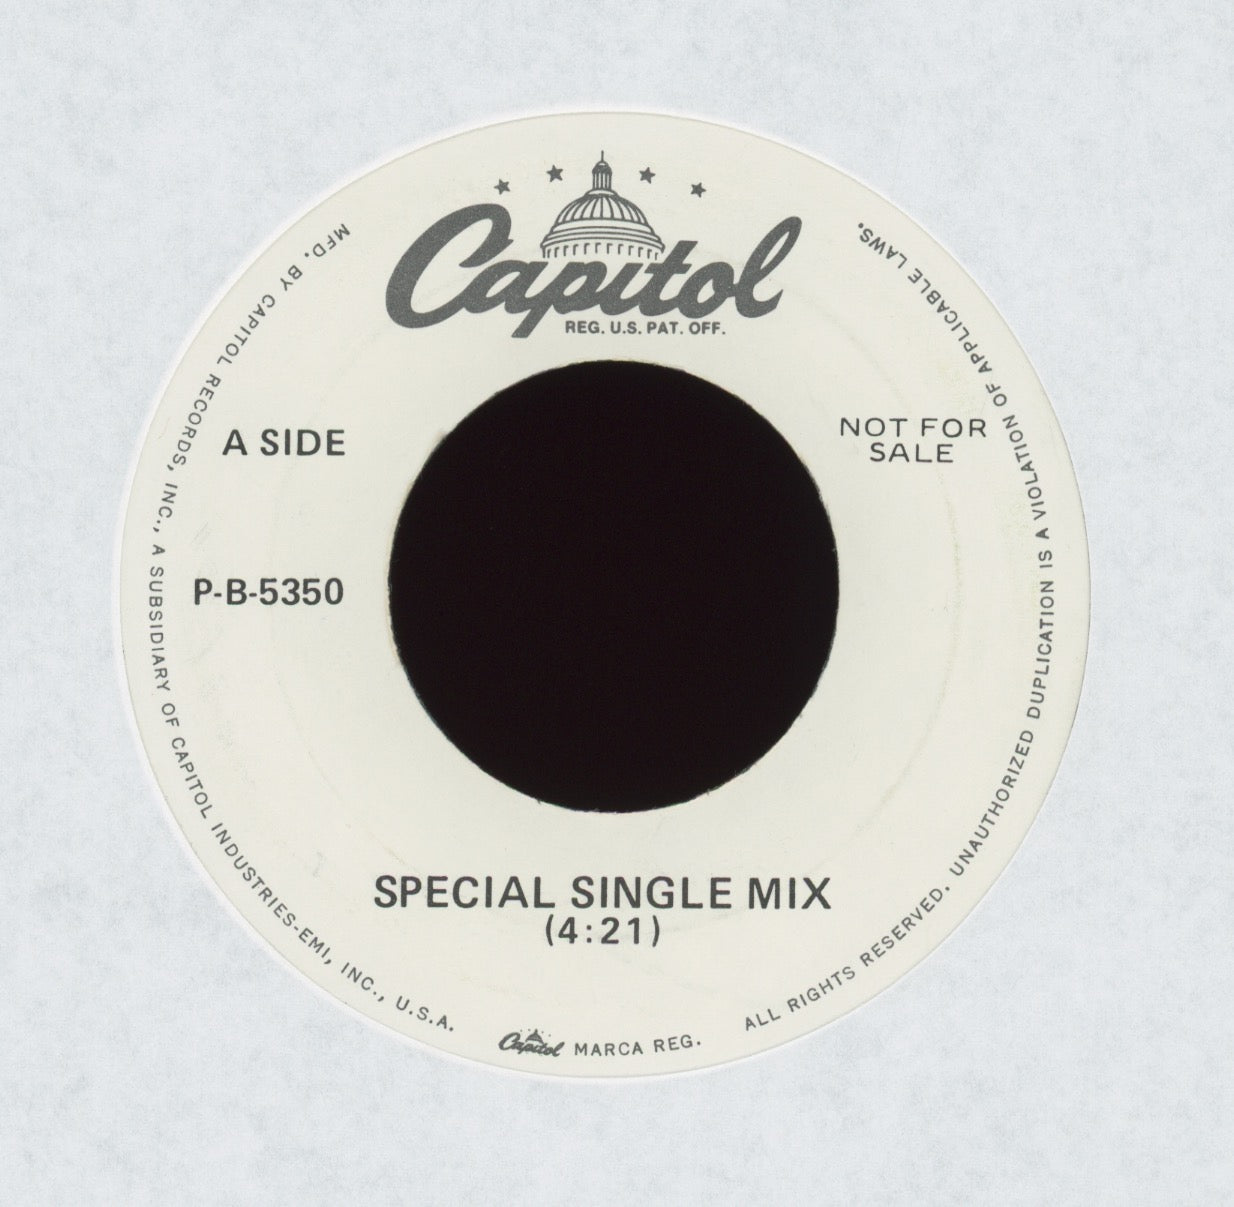 Queen - I Want To Break Free on Capitol Promo Special Single Mix Rock 45